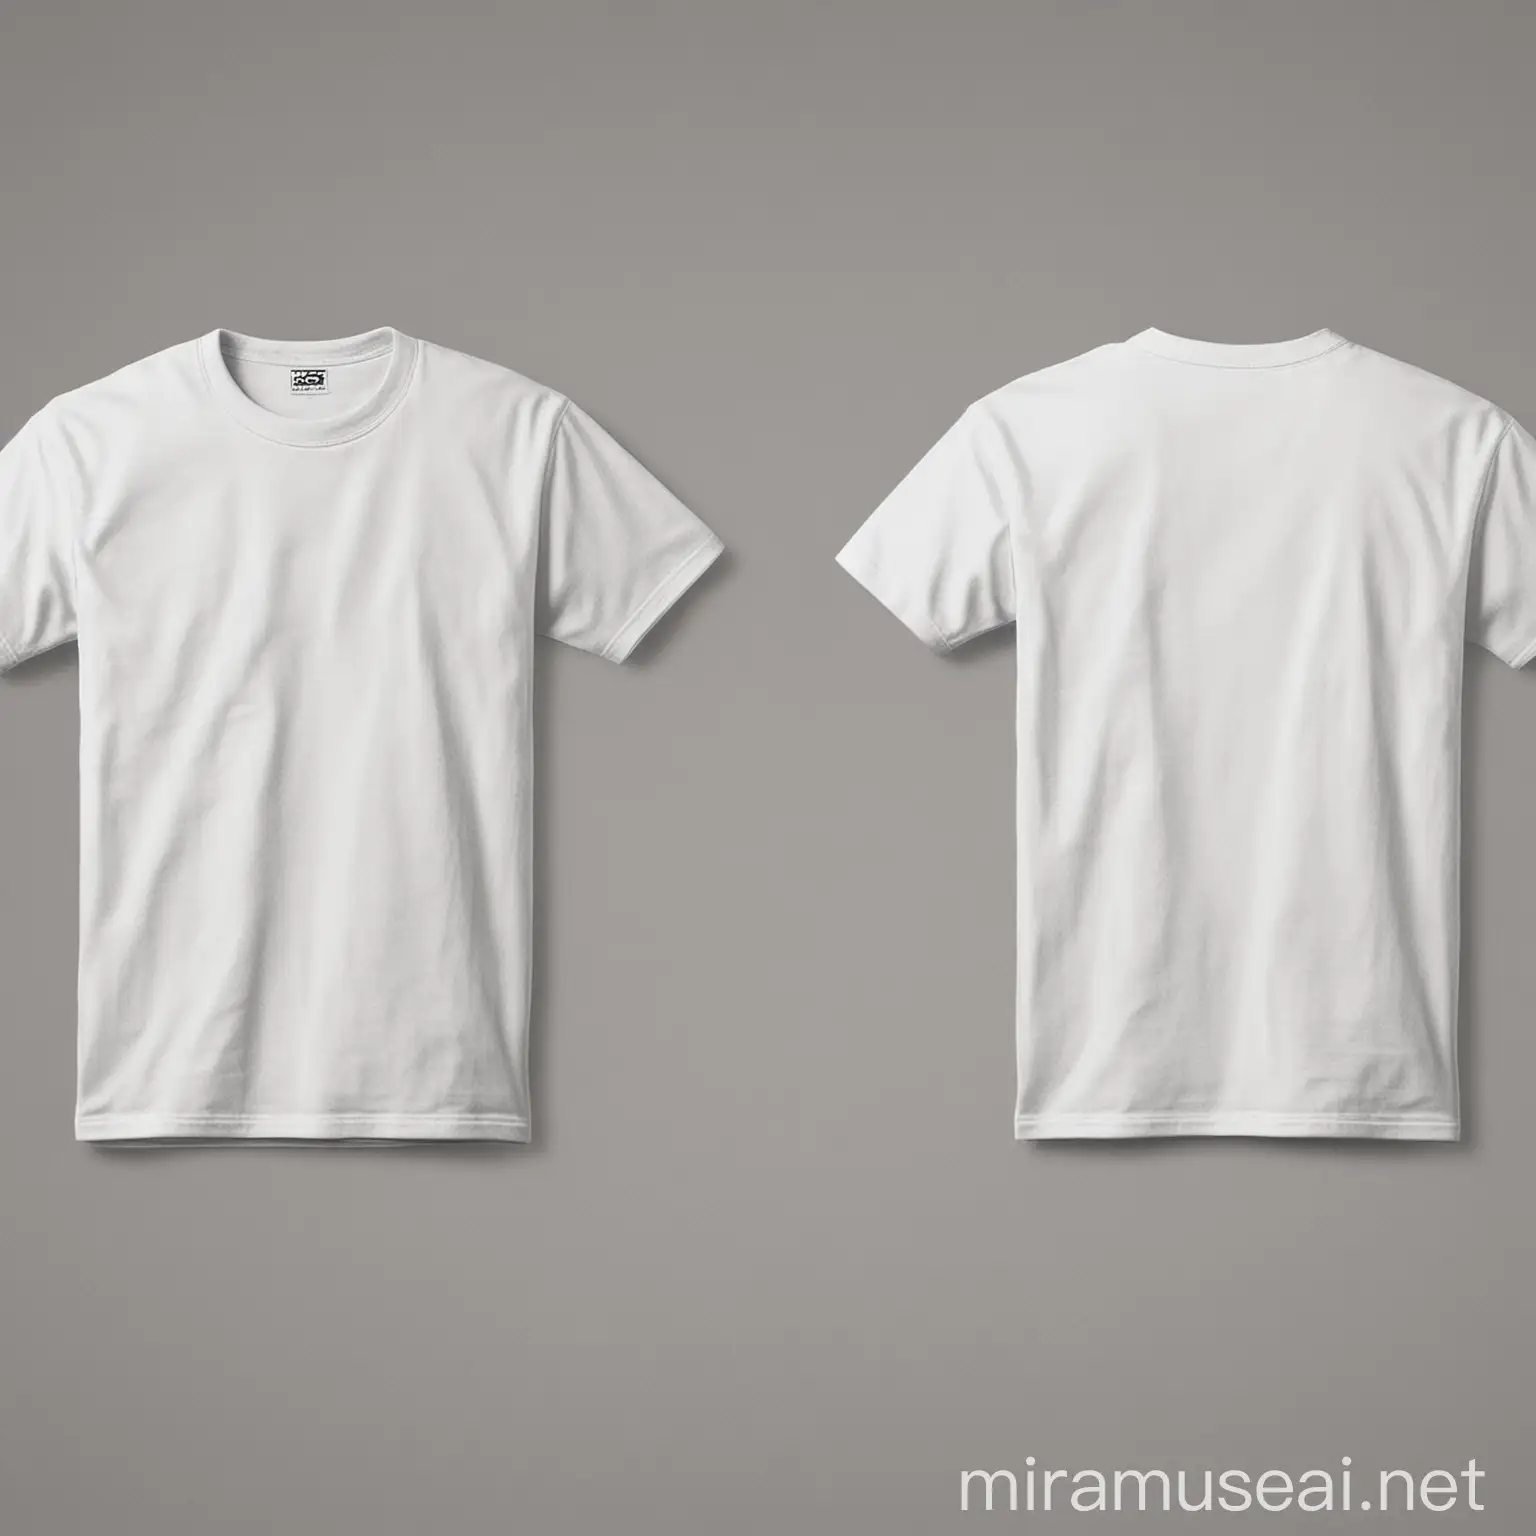 create a mockup for a white gildan 64000 tshirt front and back